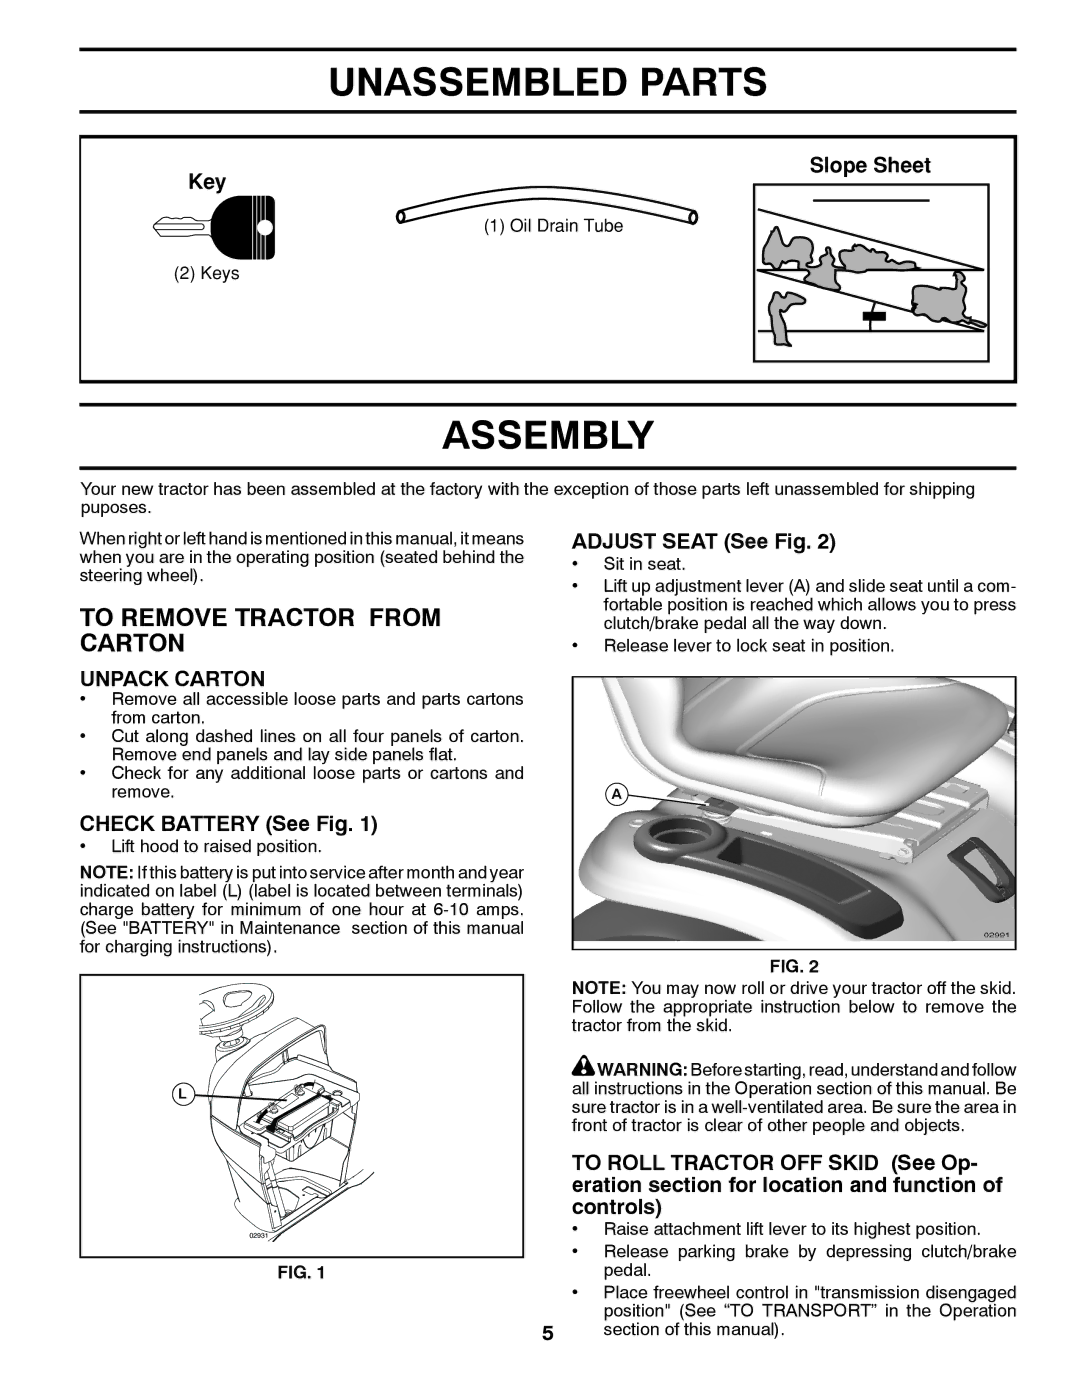 Poulan 411259 manual Unassembled Parts, Assembly, To Remove Tractor from Carton, Unpack Carton 